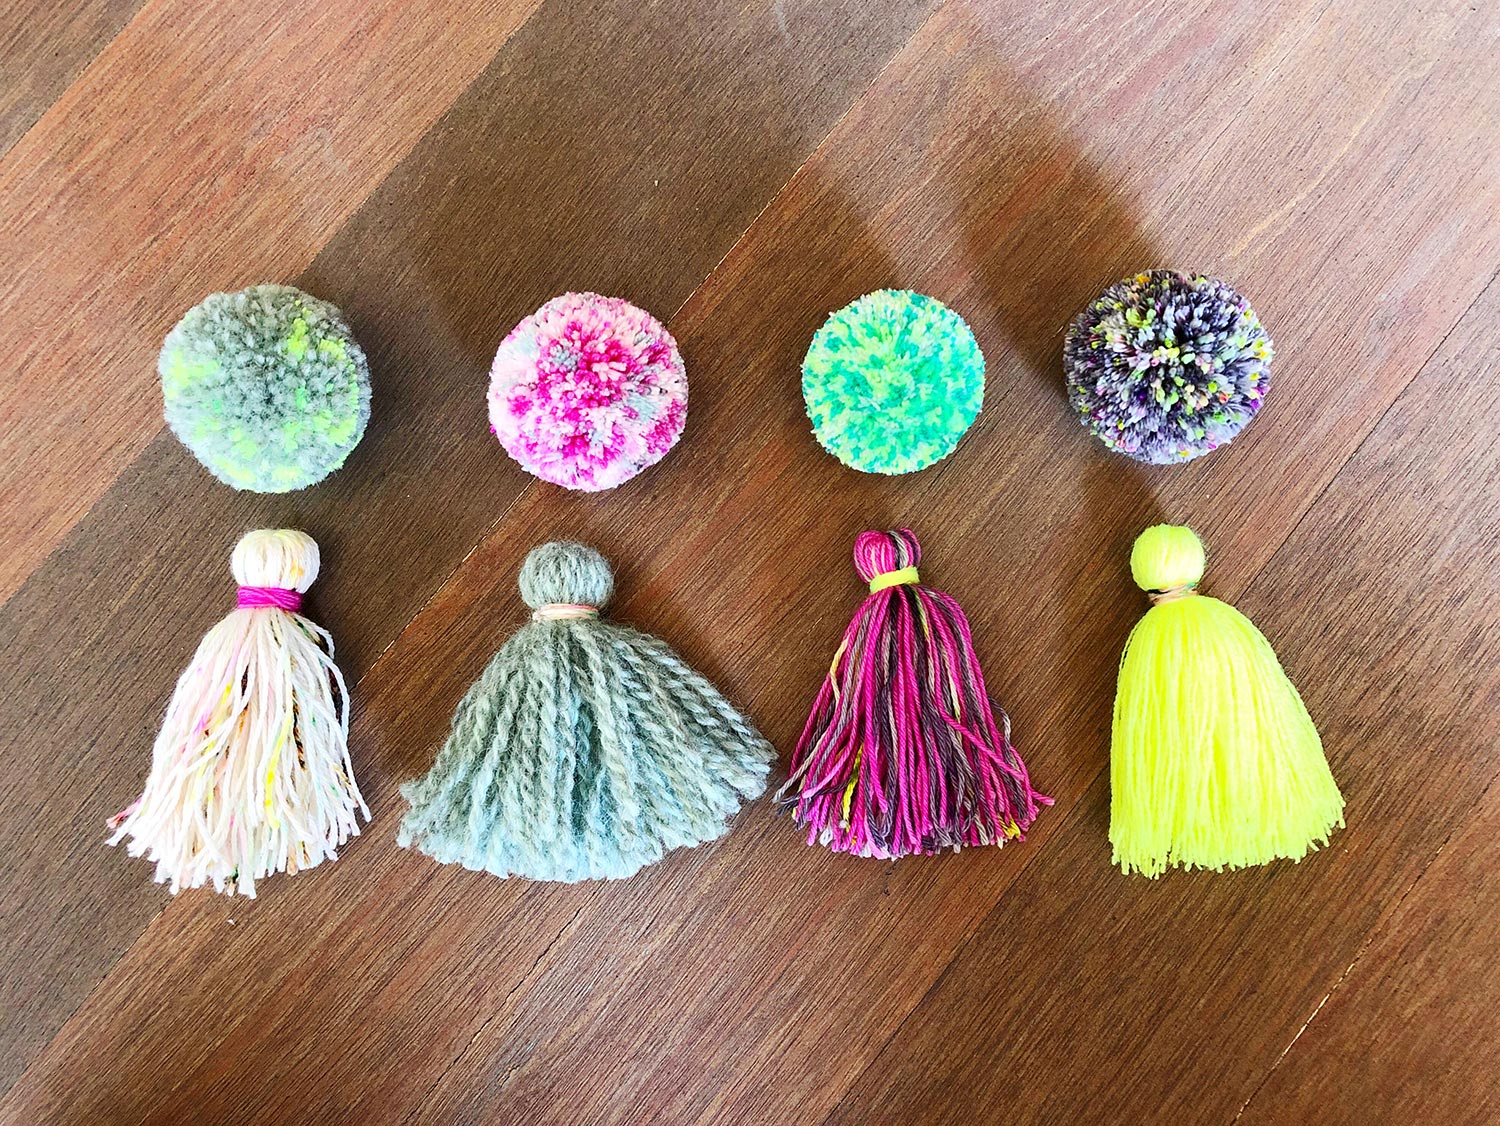 How to Make Fluffy Pom Poms & Tassels - the neon tea party